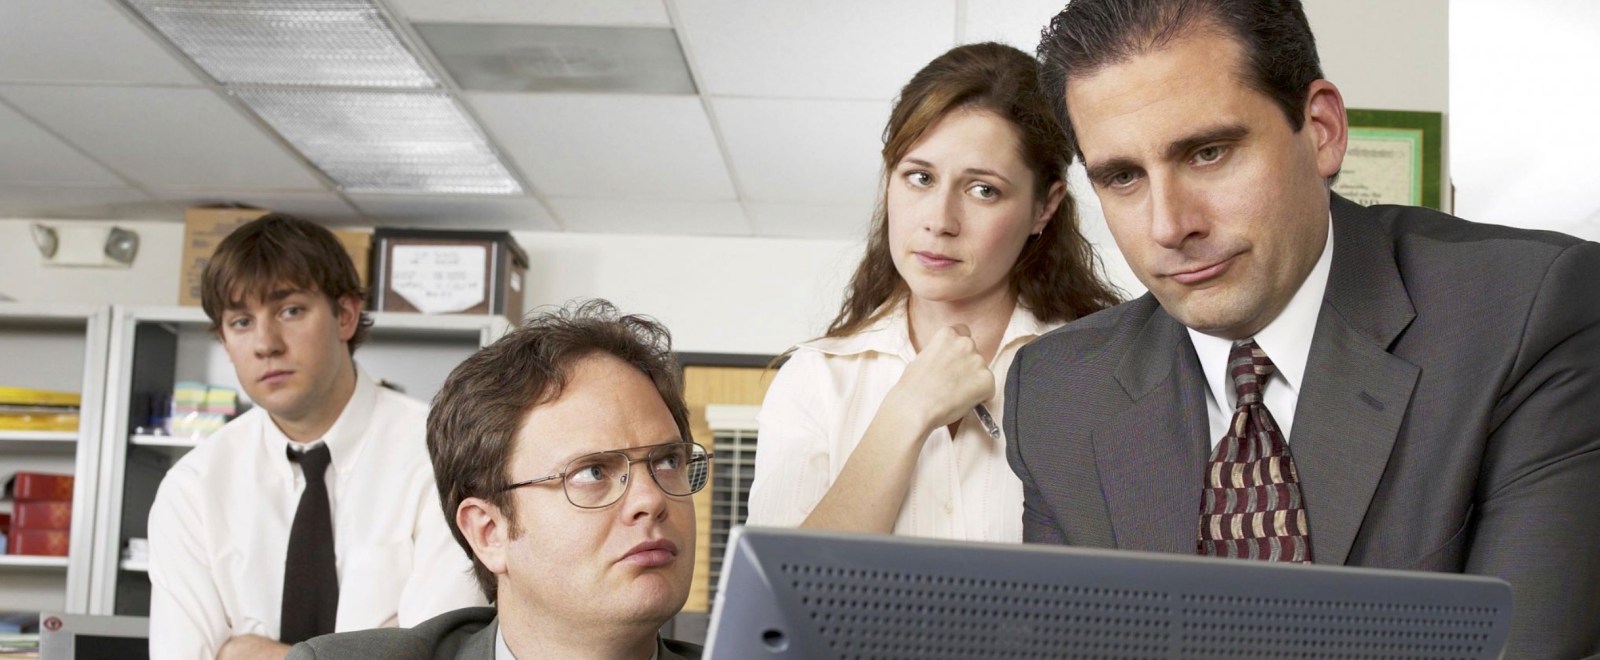 The New ‘The Office’ Cast Is Reportedly Starting To Come Together With Two Actors In The Mix